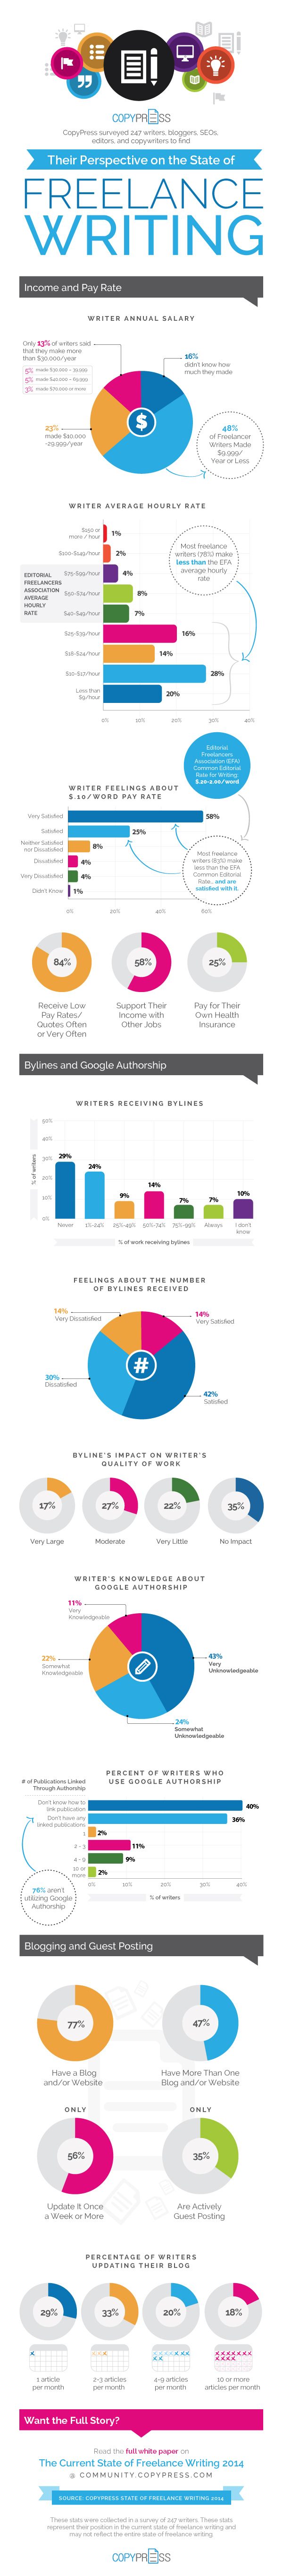 The Current State of Freelance Writing 2014 [INFOGRAPHIC]